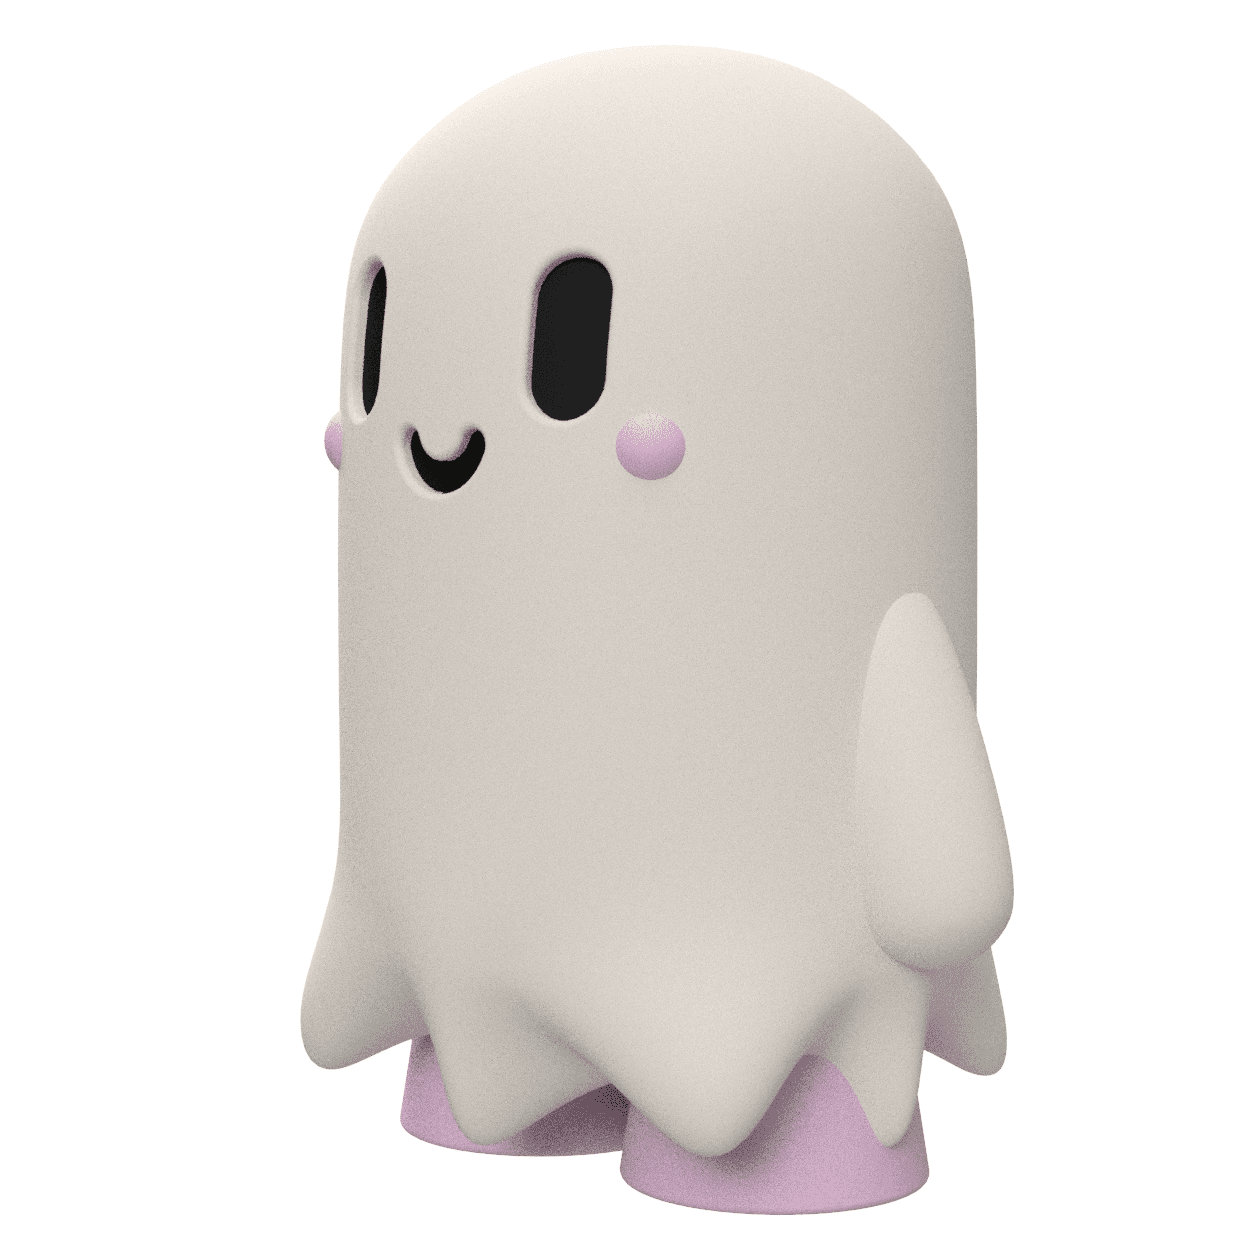 3D Printable Giggles the Friendly Ghost Figure – Perfect for Personal & Commercial Projects! 3d model